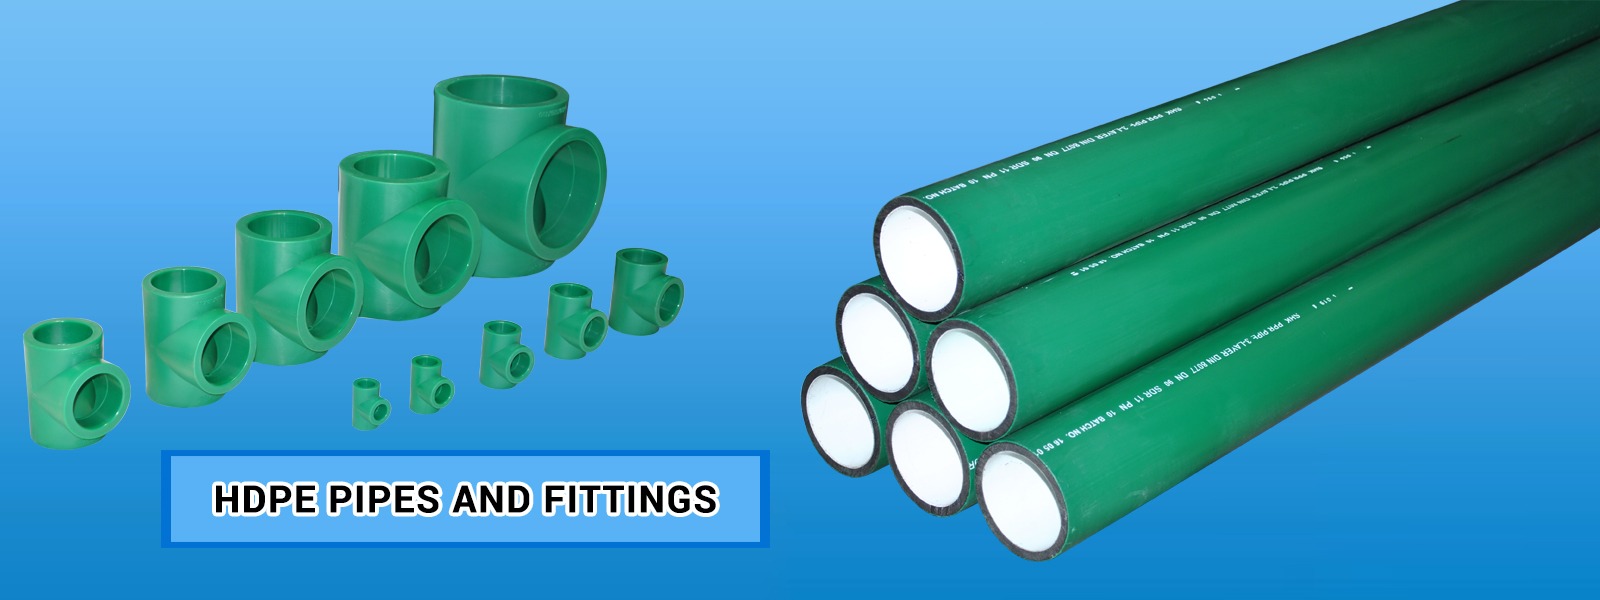 Air Compressor Fittings Supplier